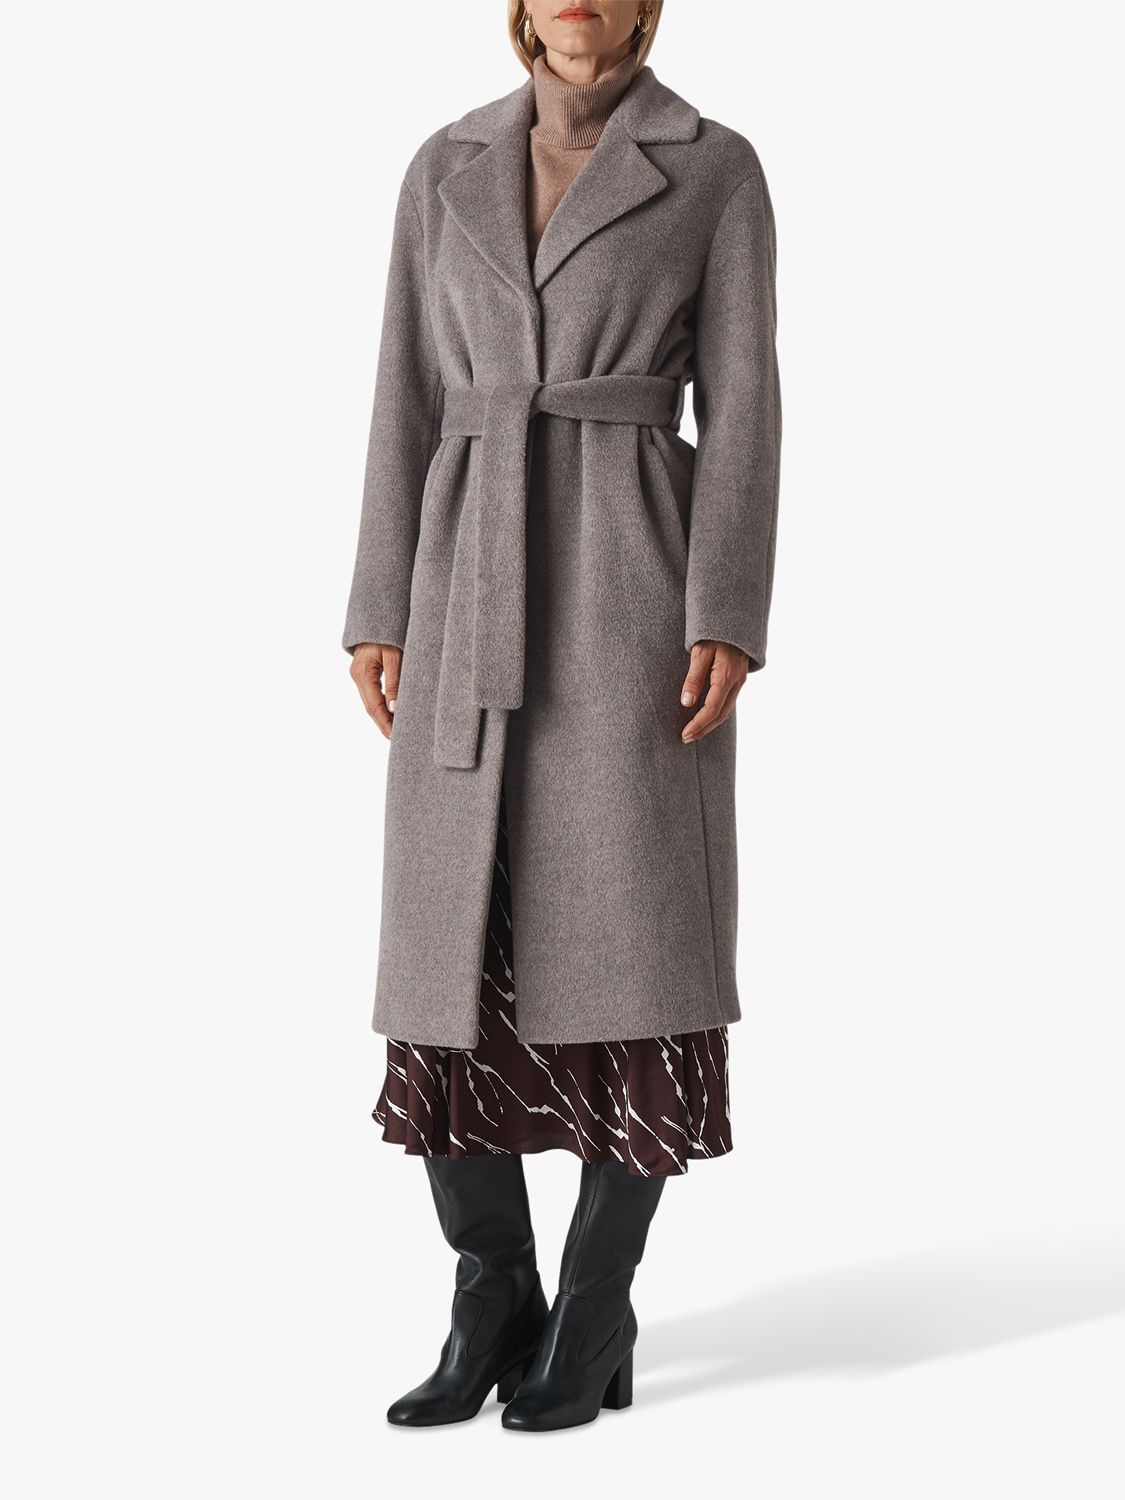 Grey Croc Belted Trench Coat, WHISTLES